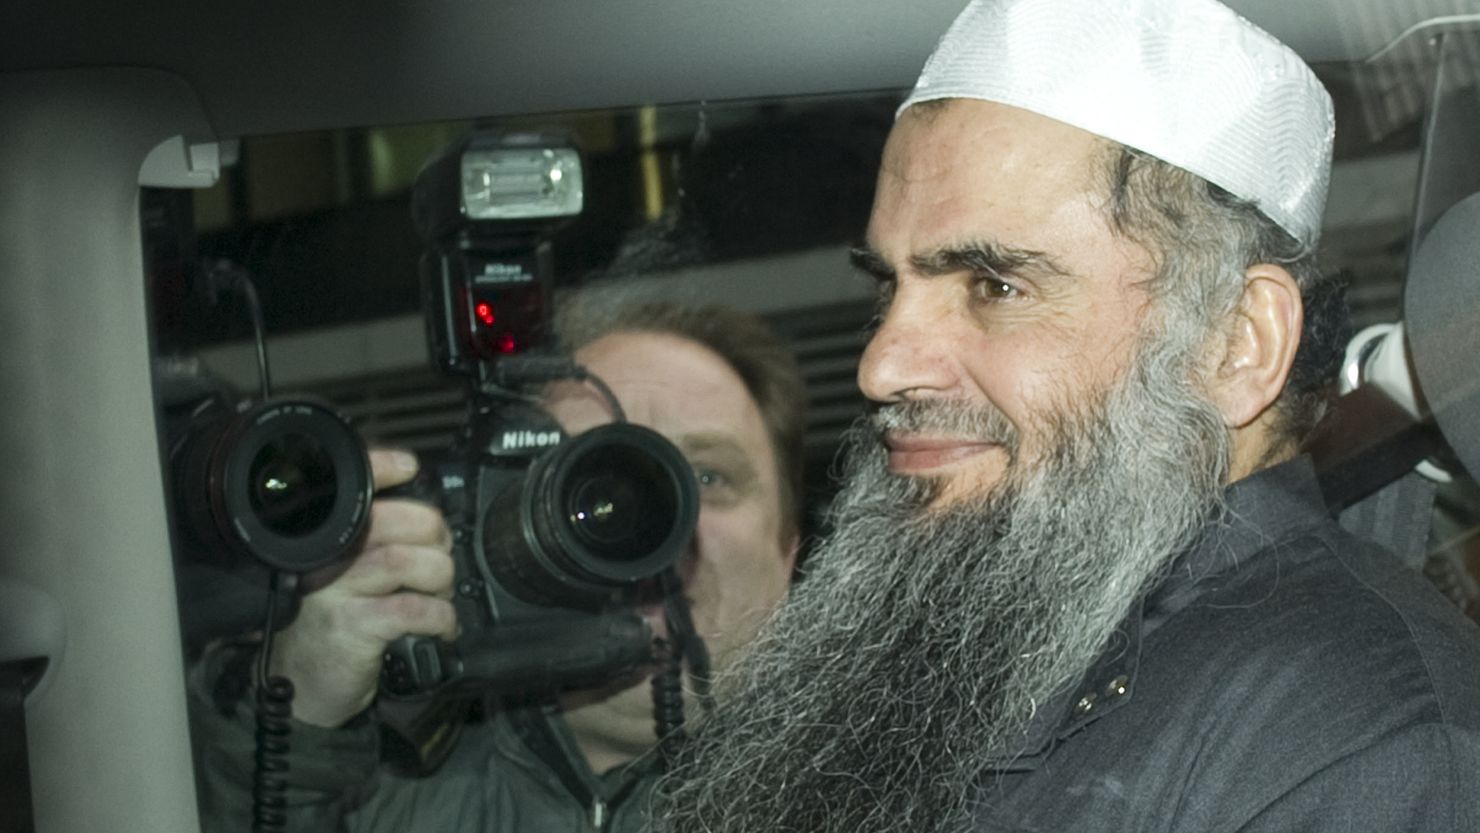 The European Court of Human Rights has decided not intervene again to stop Britain from deporting Abu Qatada. 